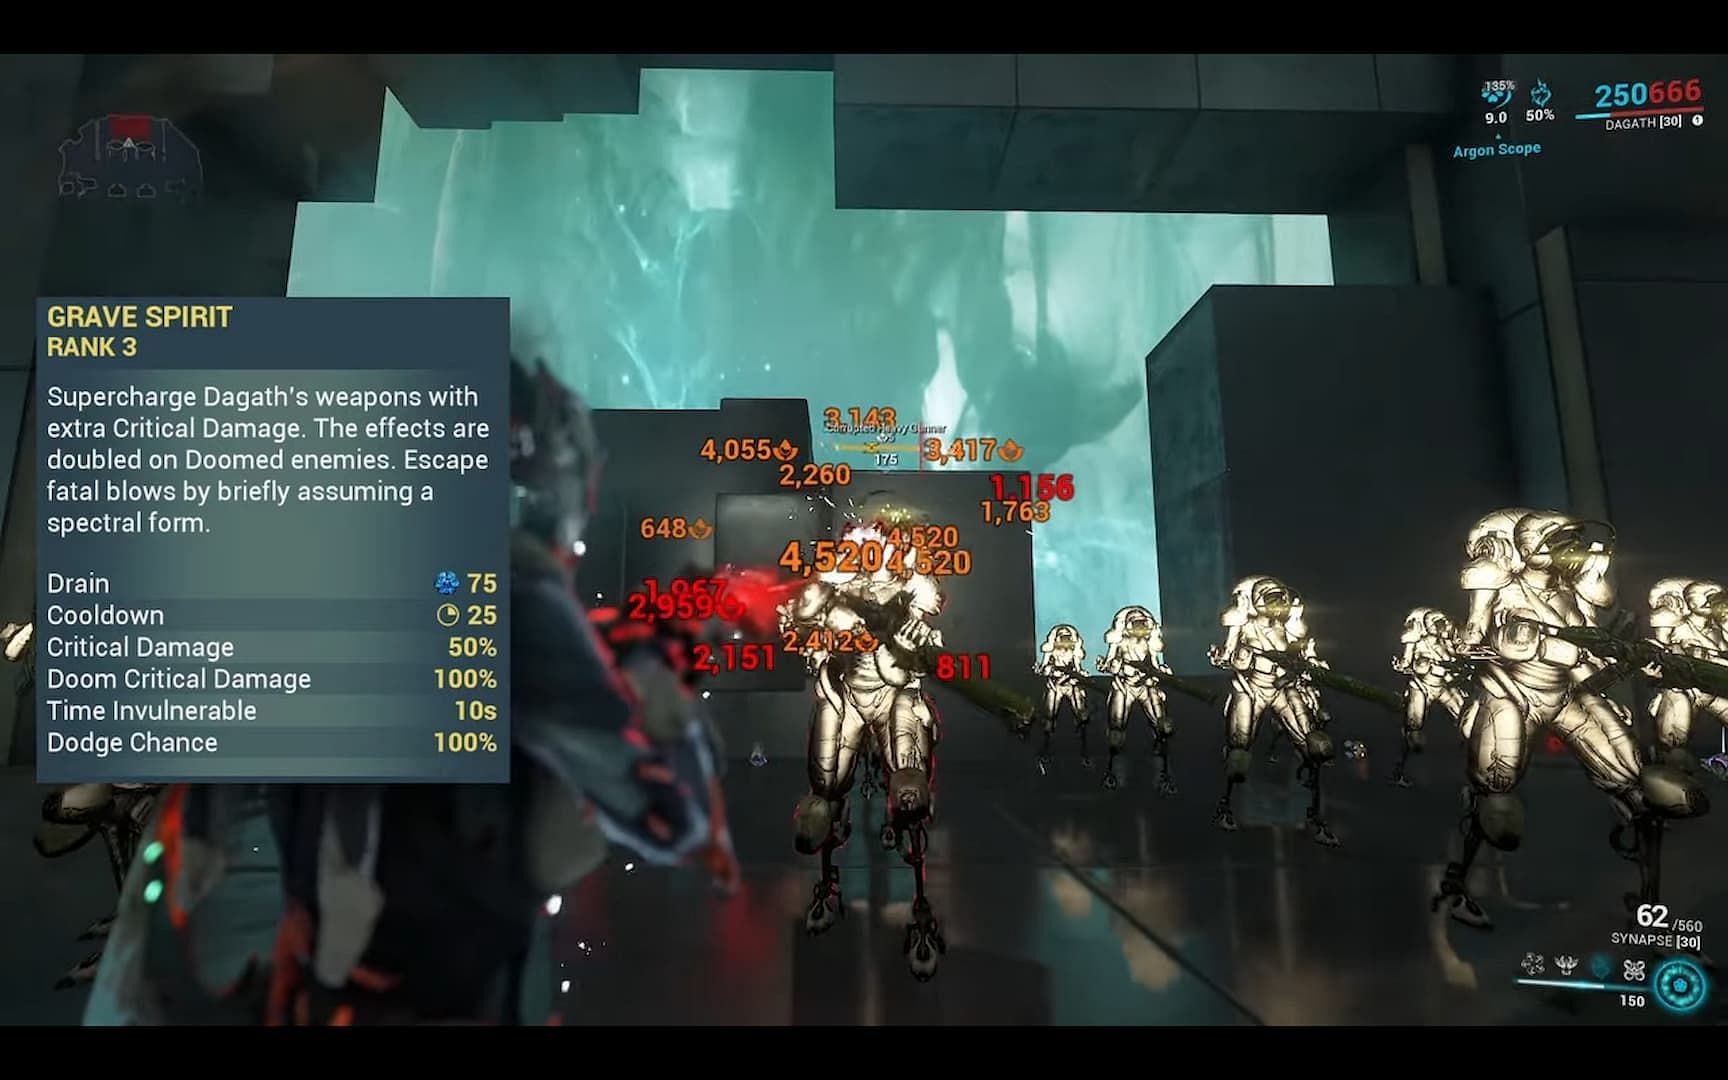 Grave Spirit increases Critical Damage on all weapons wielded by Dagath (Image via Digital Extremes)